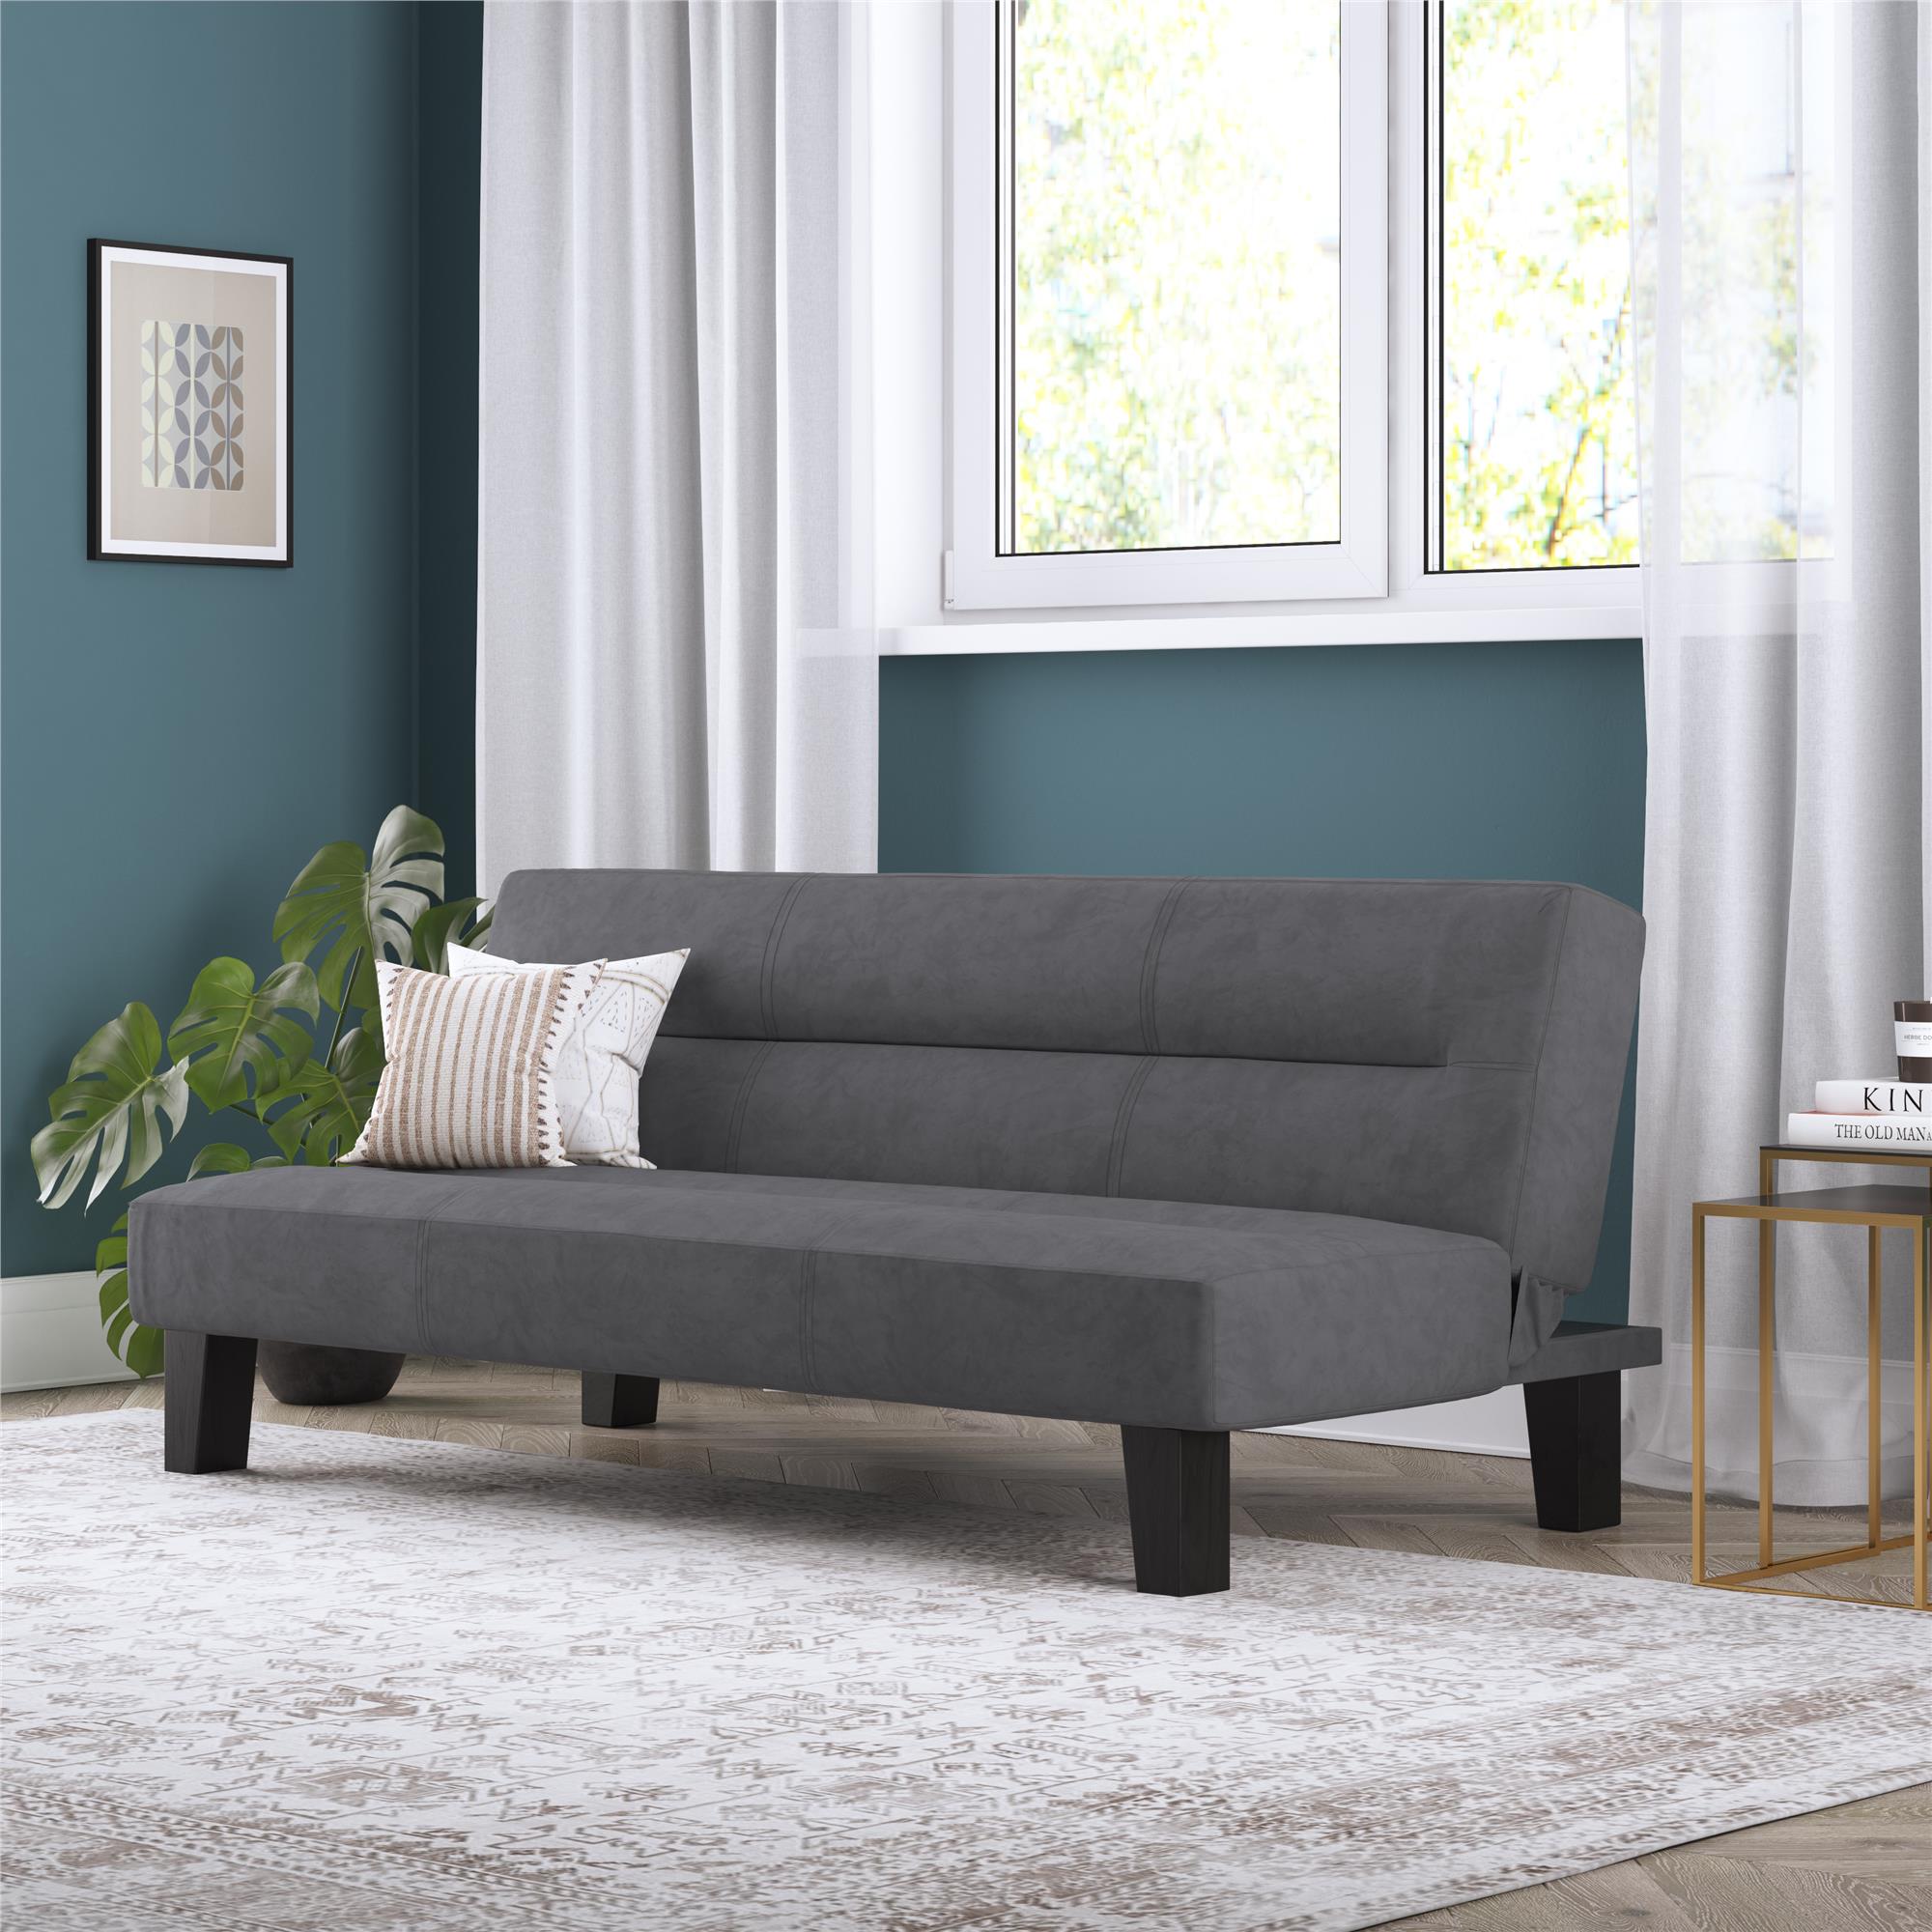 DHP Kebo Futon with Microfiber Cover, Gray Microfiber - image 1 of 14